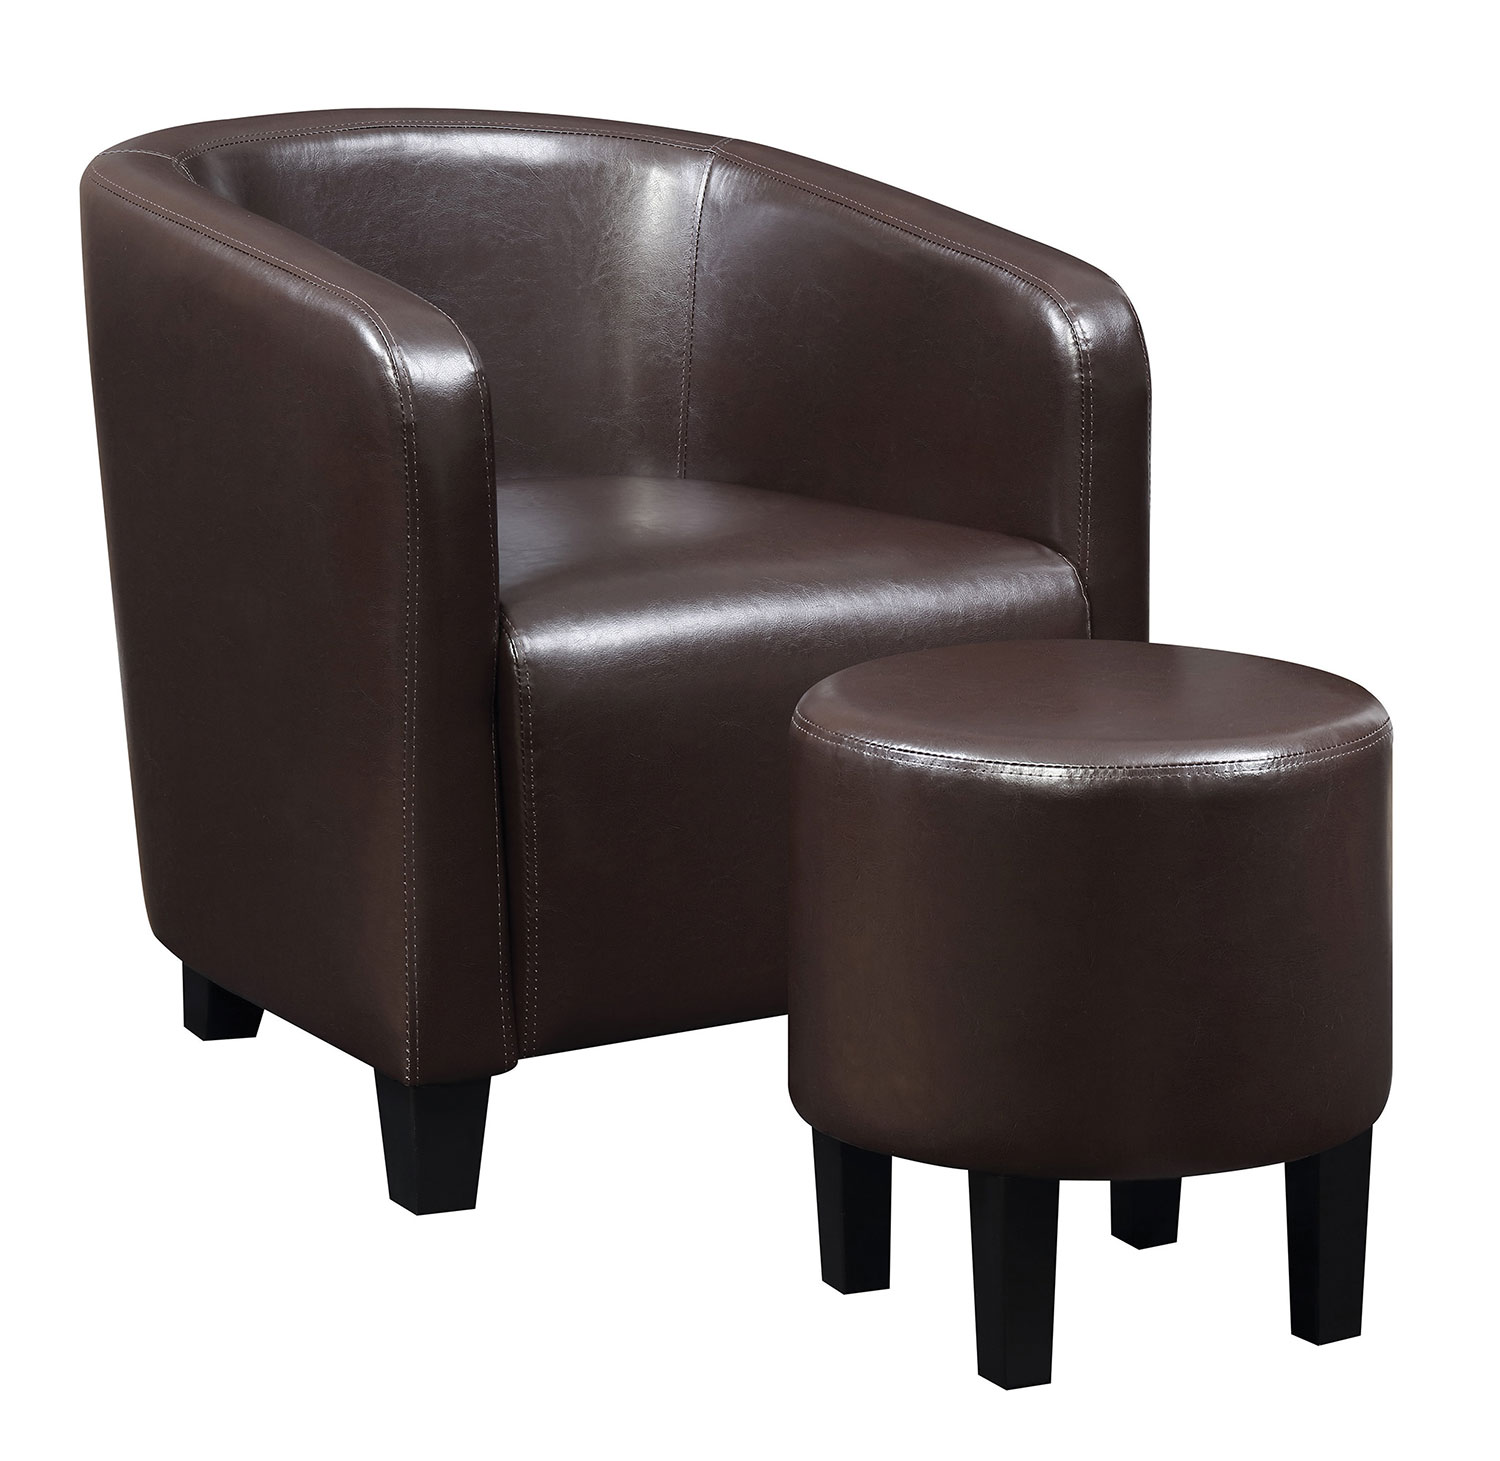 Coaster 903362 Accent Chair with Ottoman - Brown